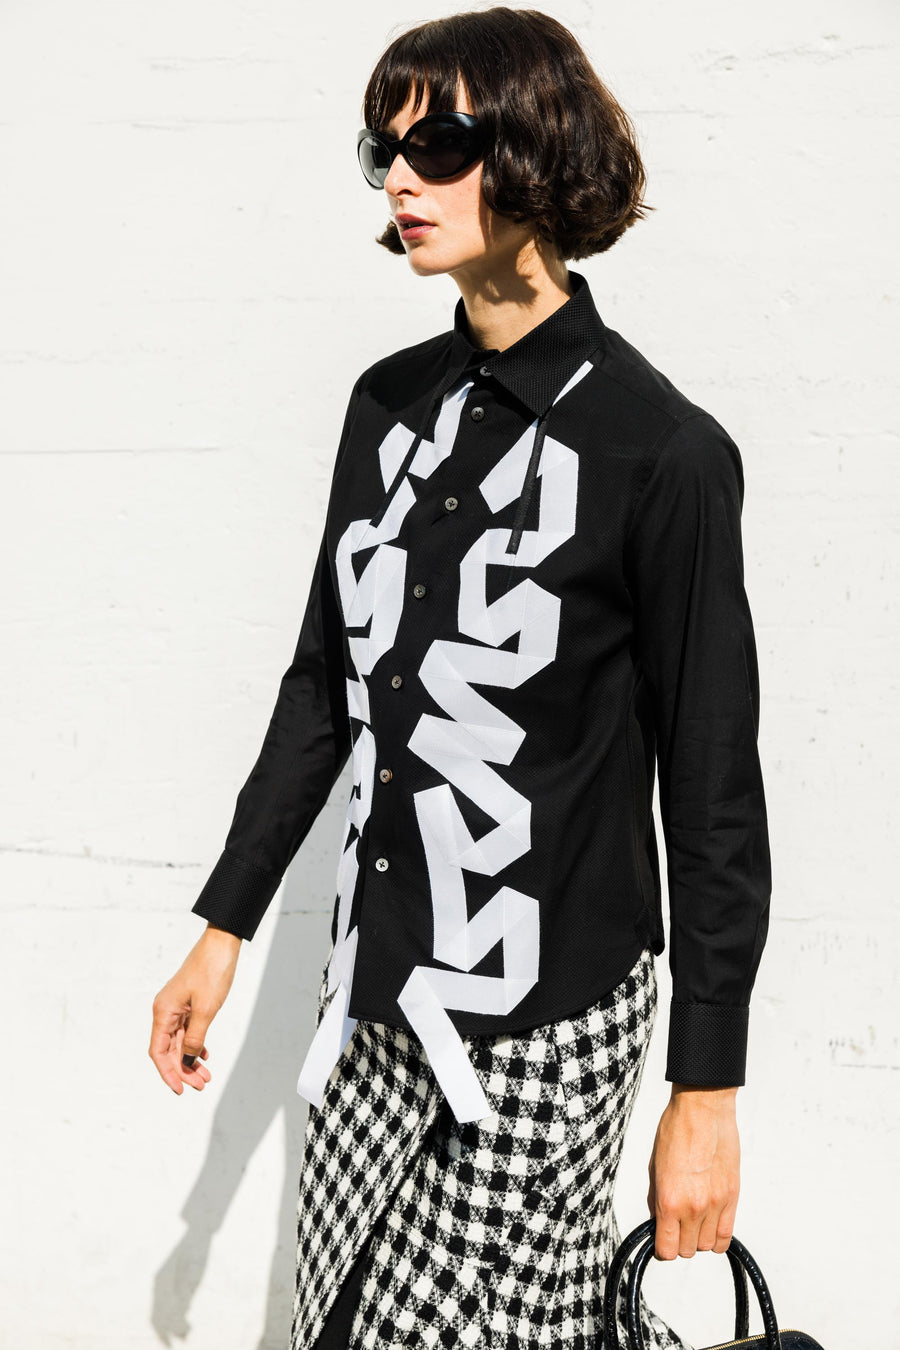 SS Cotton Shirt in Black w/ White Ribbons